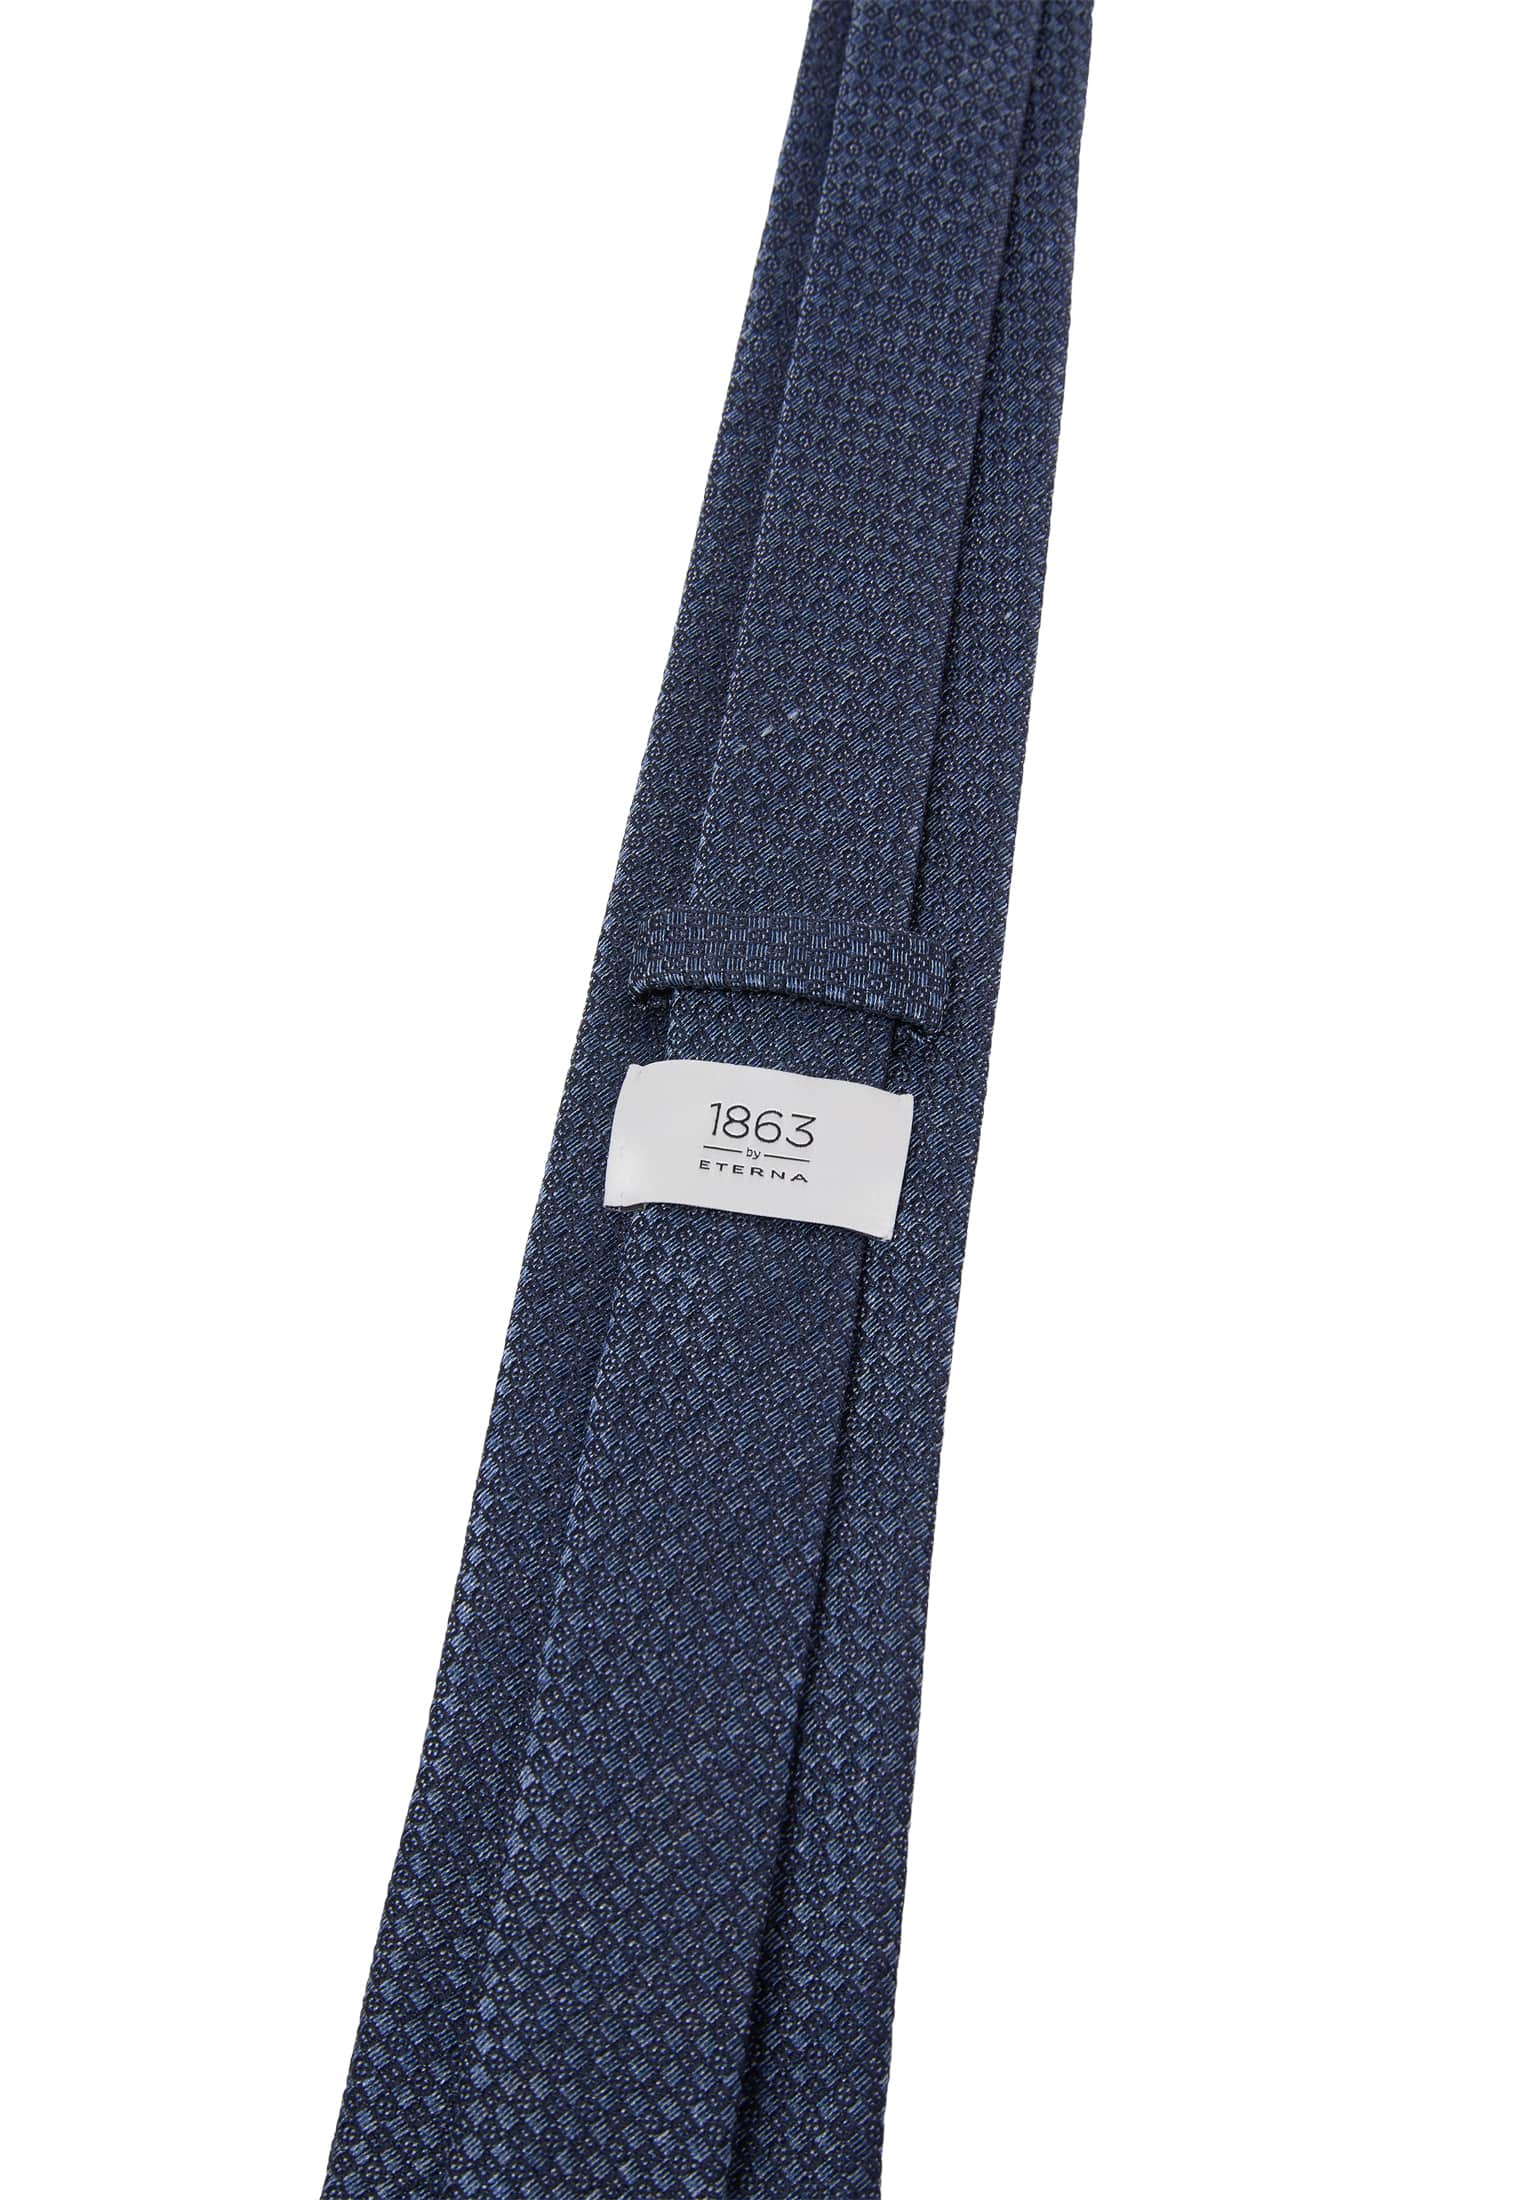 Tie in blue-gray structured